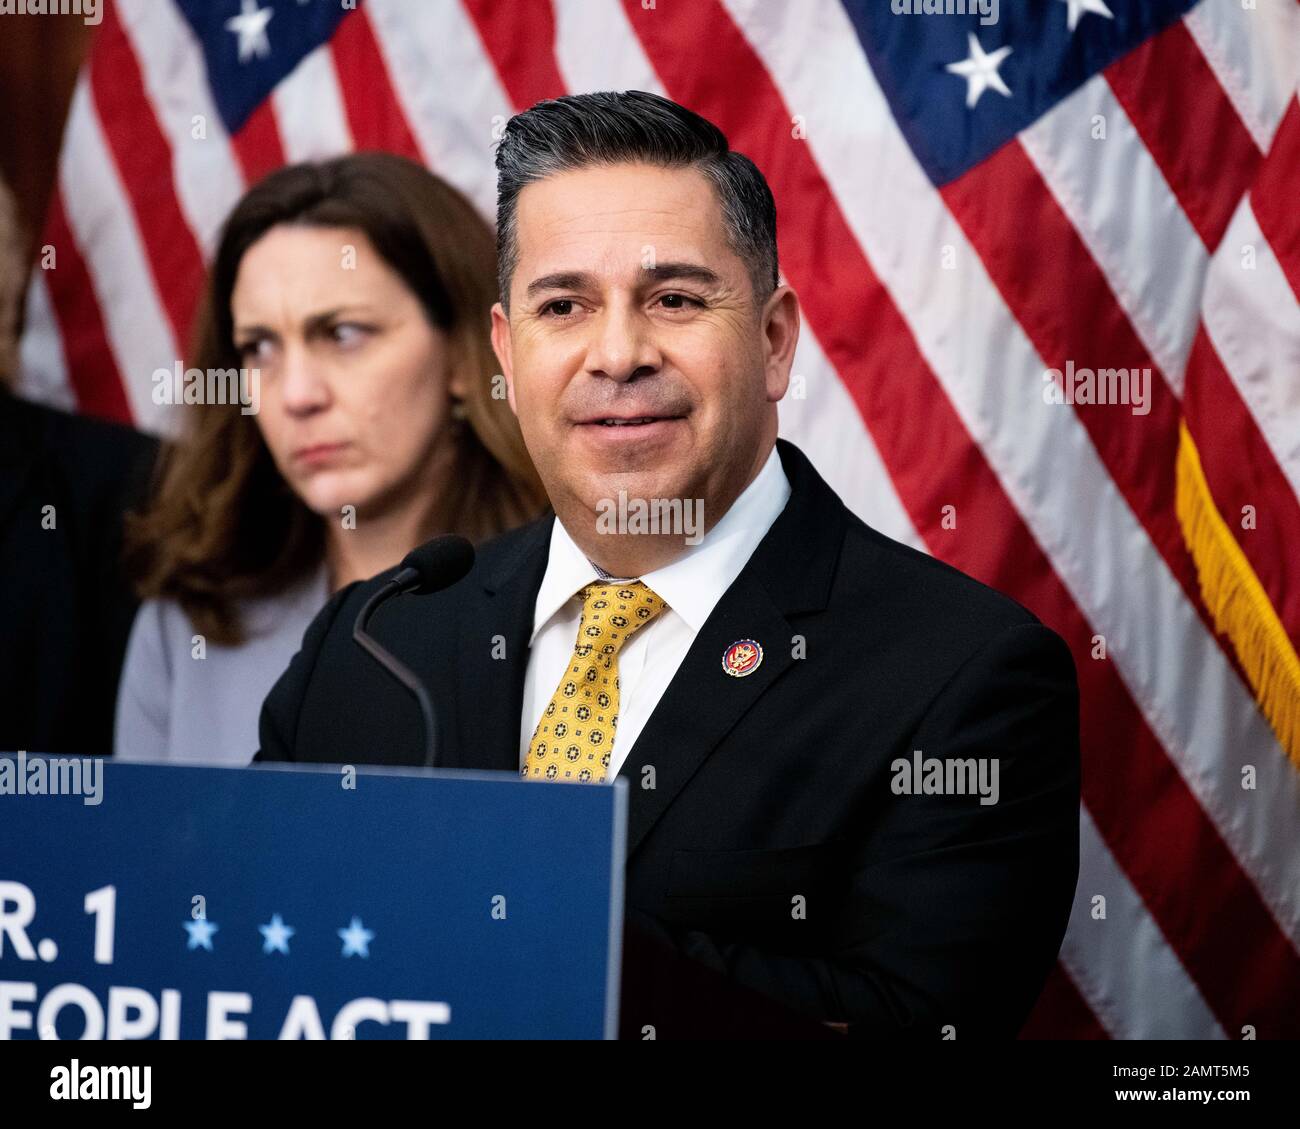 January 14, 2020 - Washington, DC, United States:  U.S. Representative Ben Lujan (D-NM) speaking at an event for the ten year anniversary of the Citizens United Decision. (Photo by Michael Brochstein/Sipa USA) Stock Photo